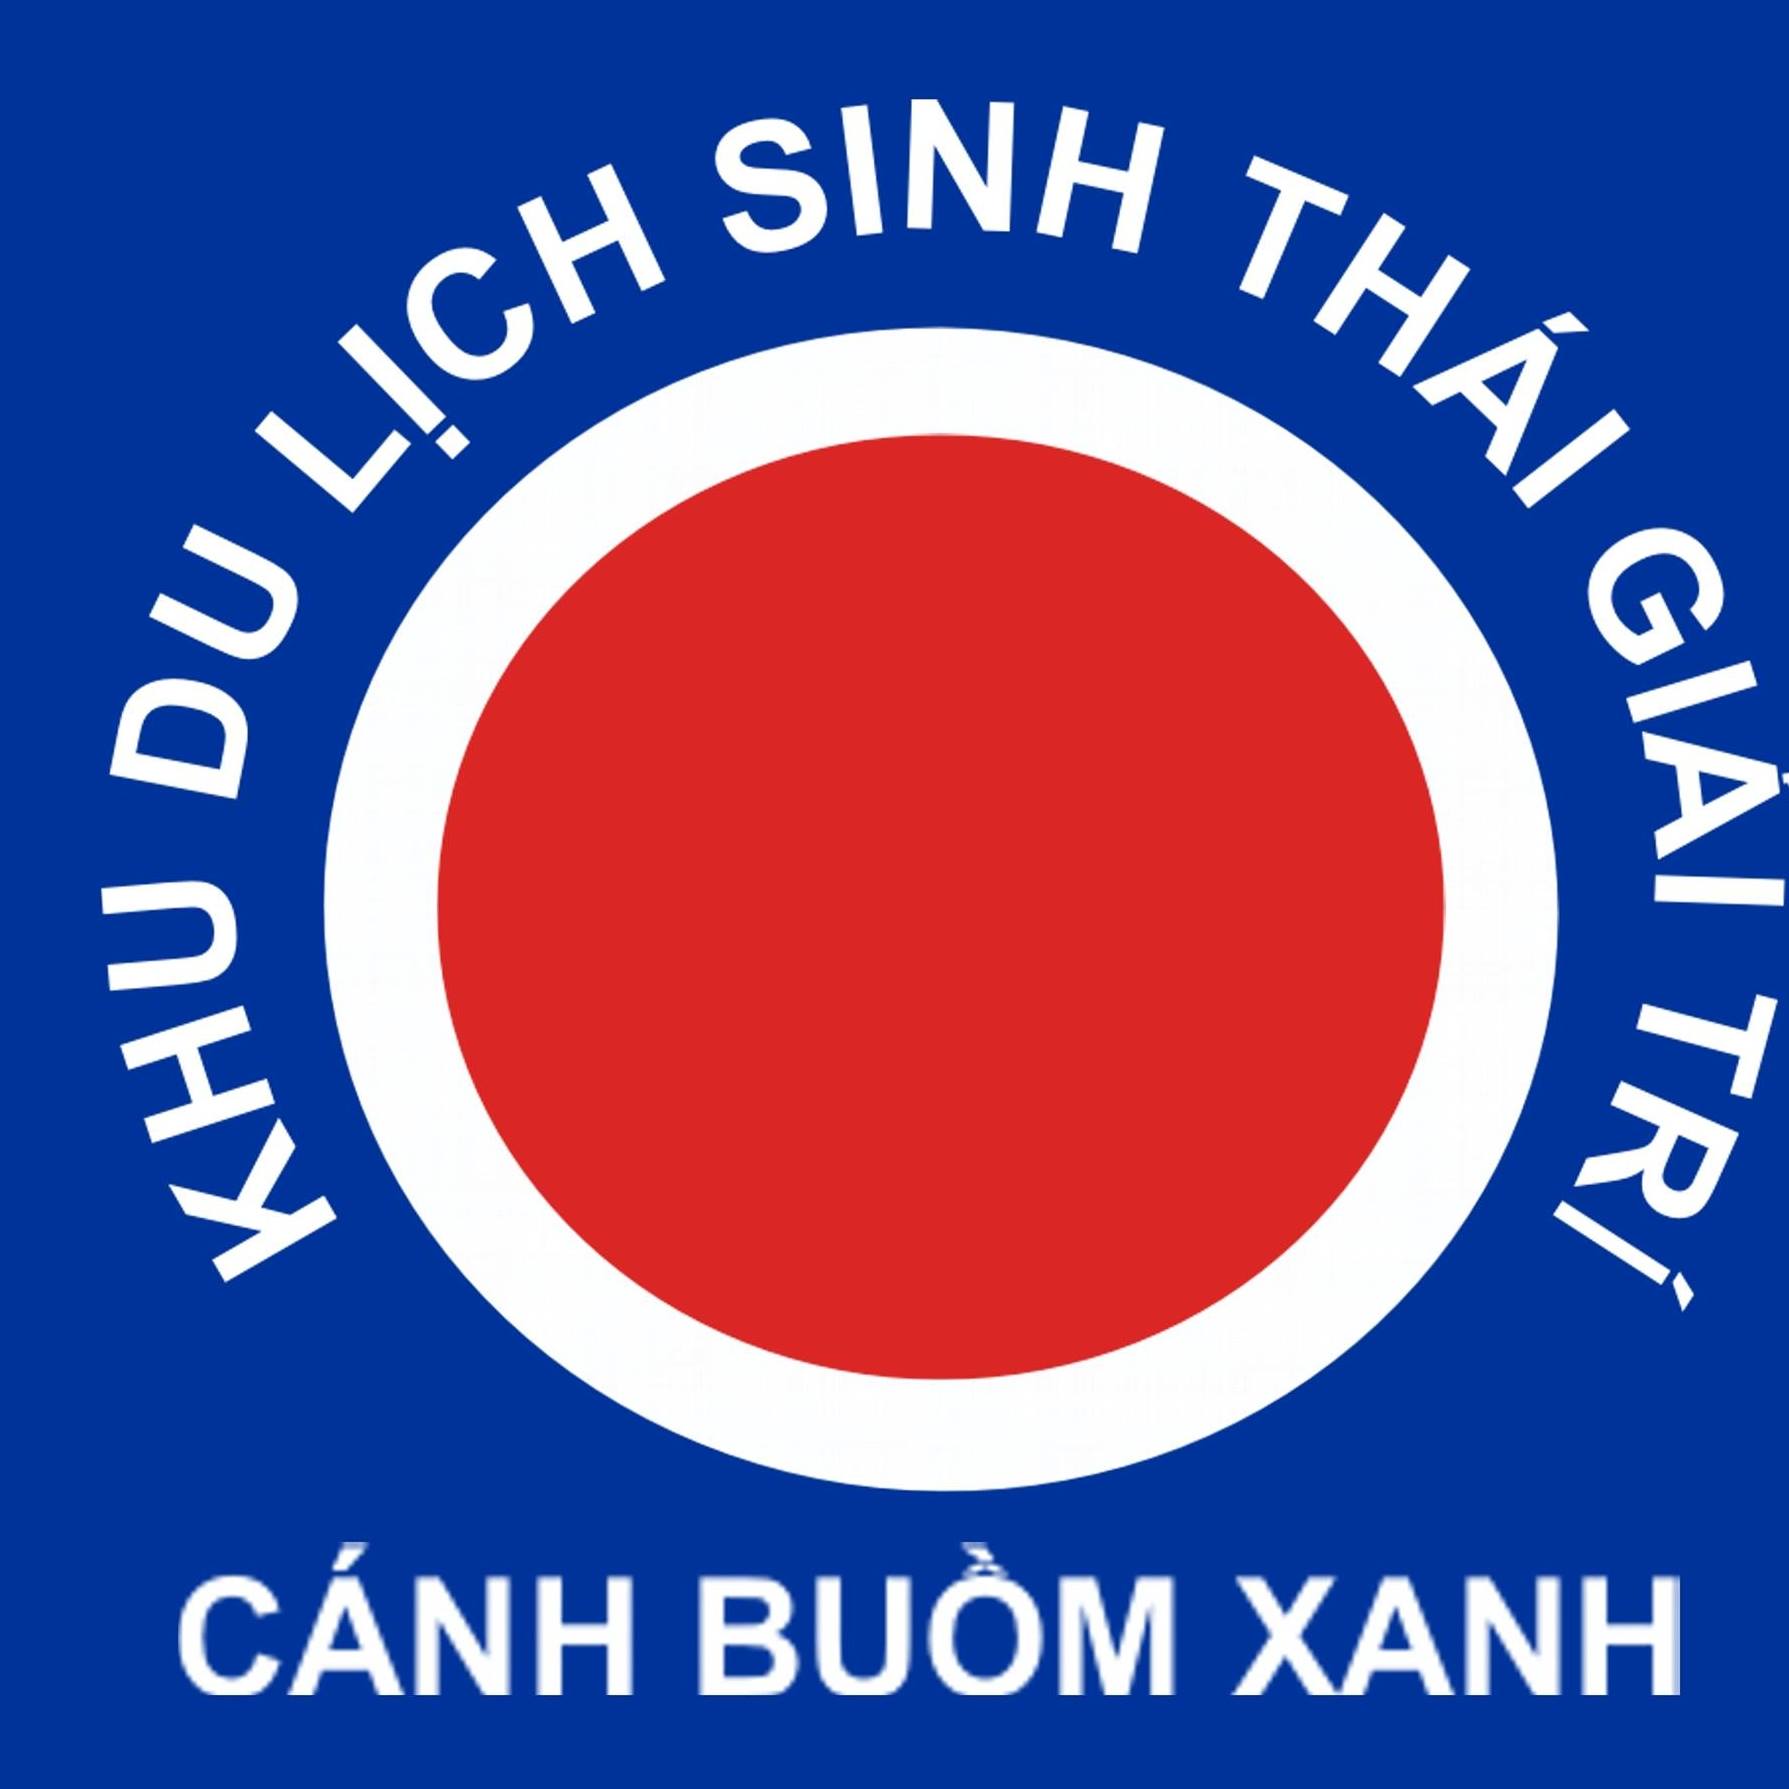 Canh Buom Xanh Sinh Thai